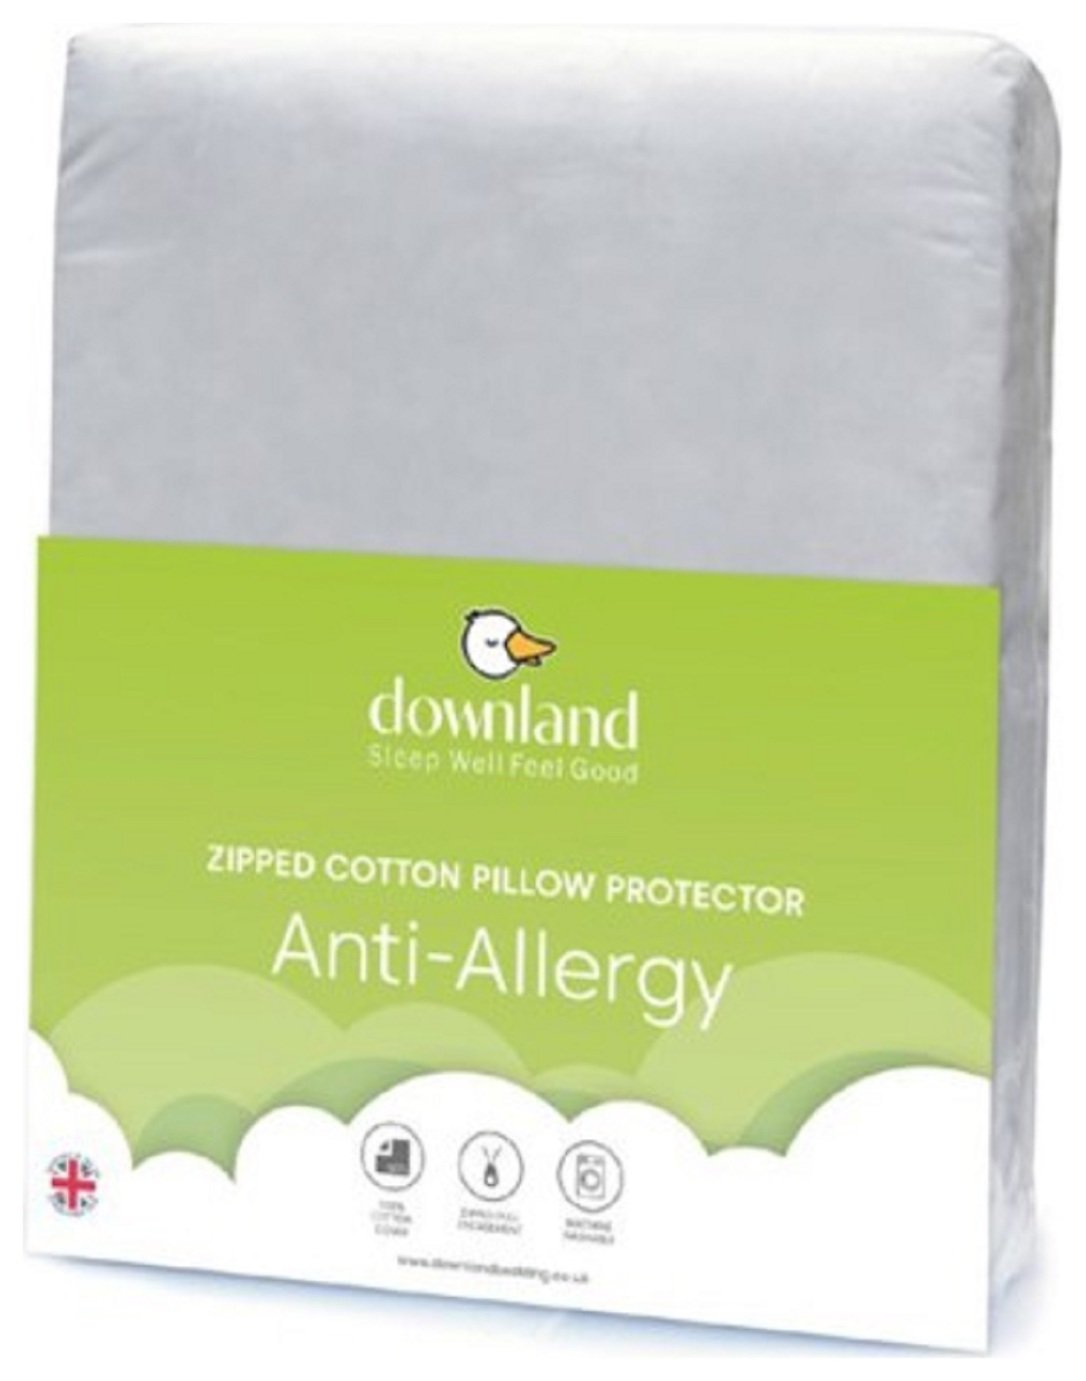 Downland Anti Allergy Zipped Pillow Protector - 2 Pack